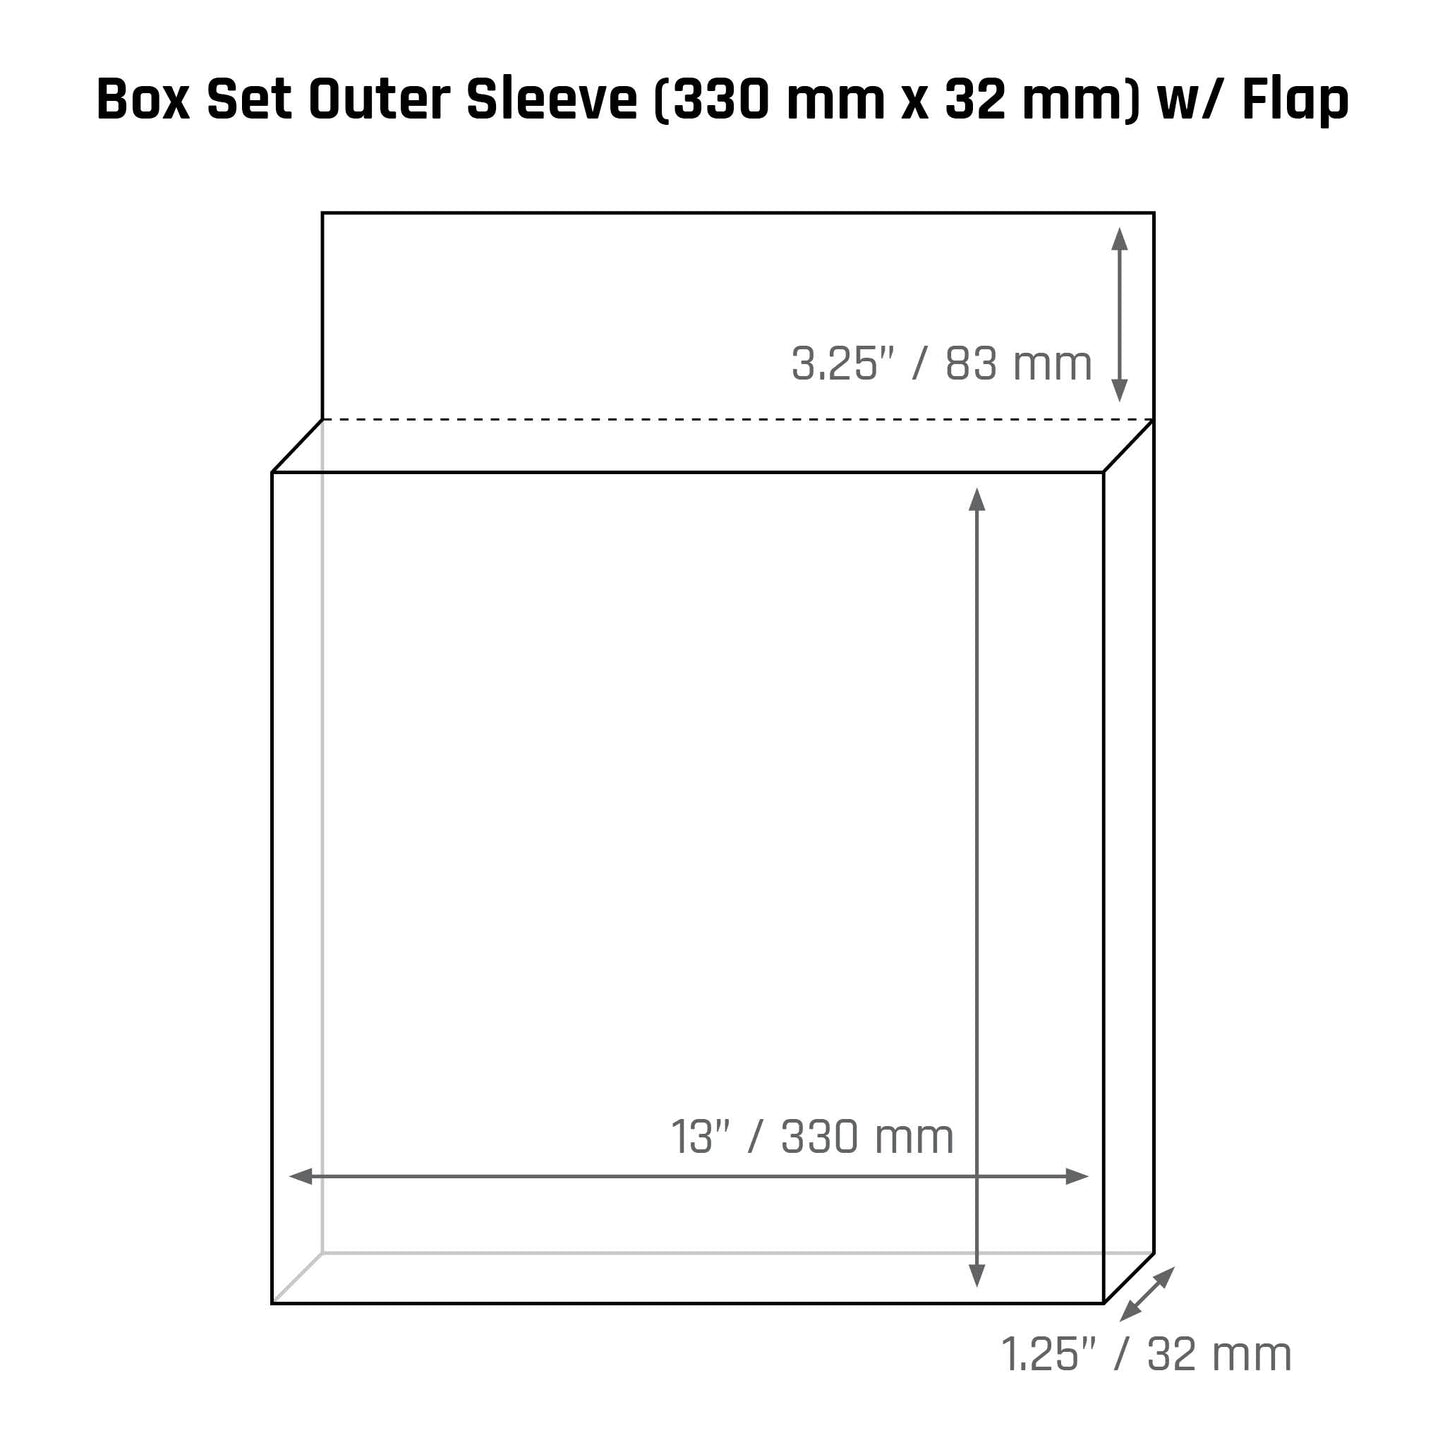 Box Set Outer Sleeve (330 mm x 32 mm) - 3mil